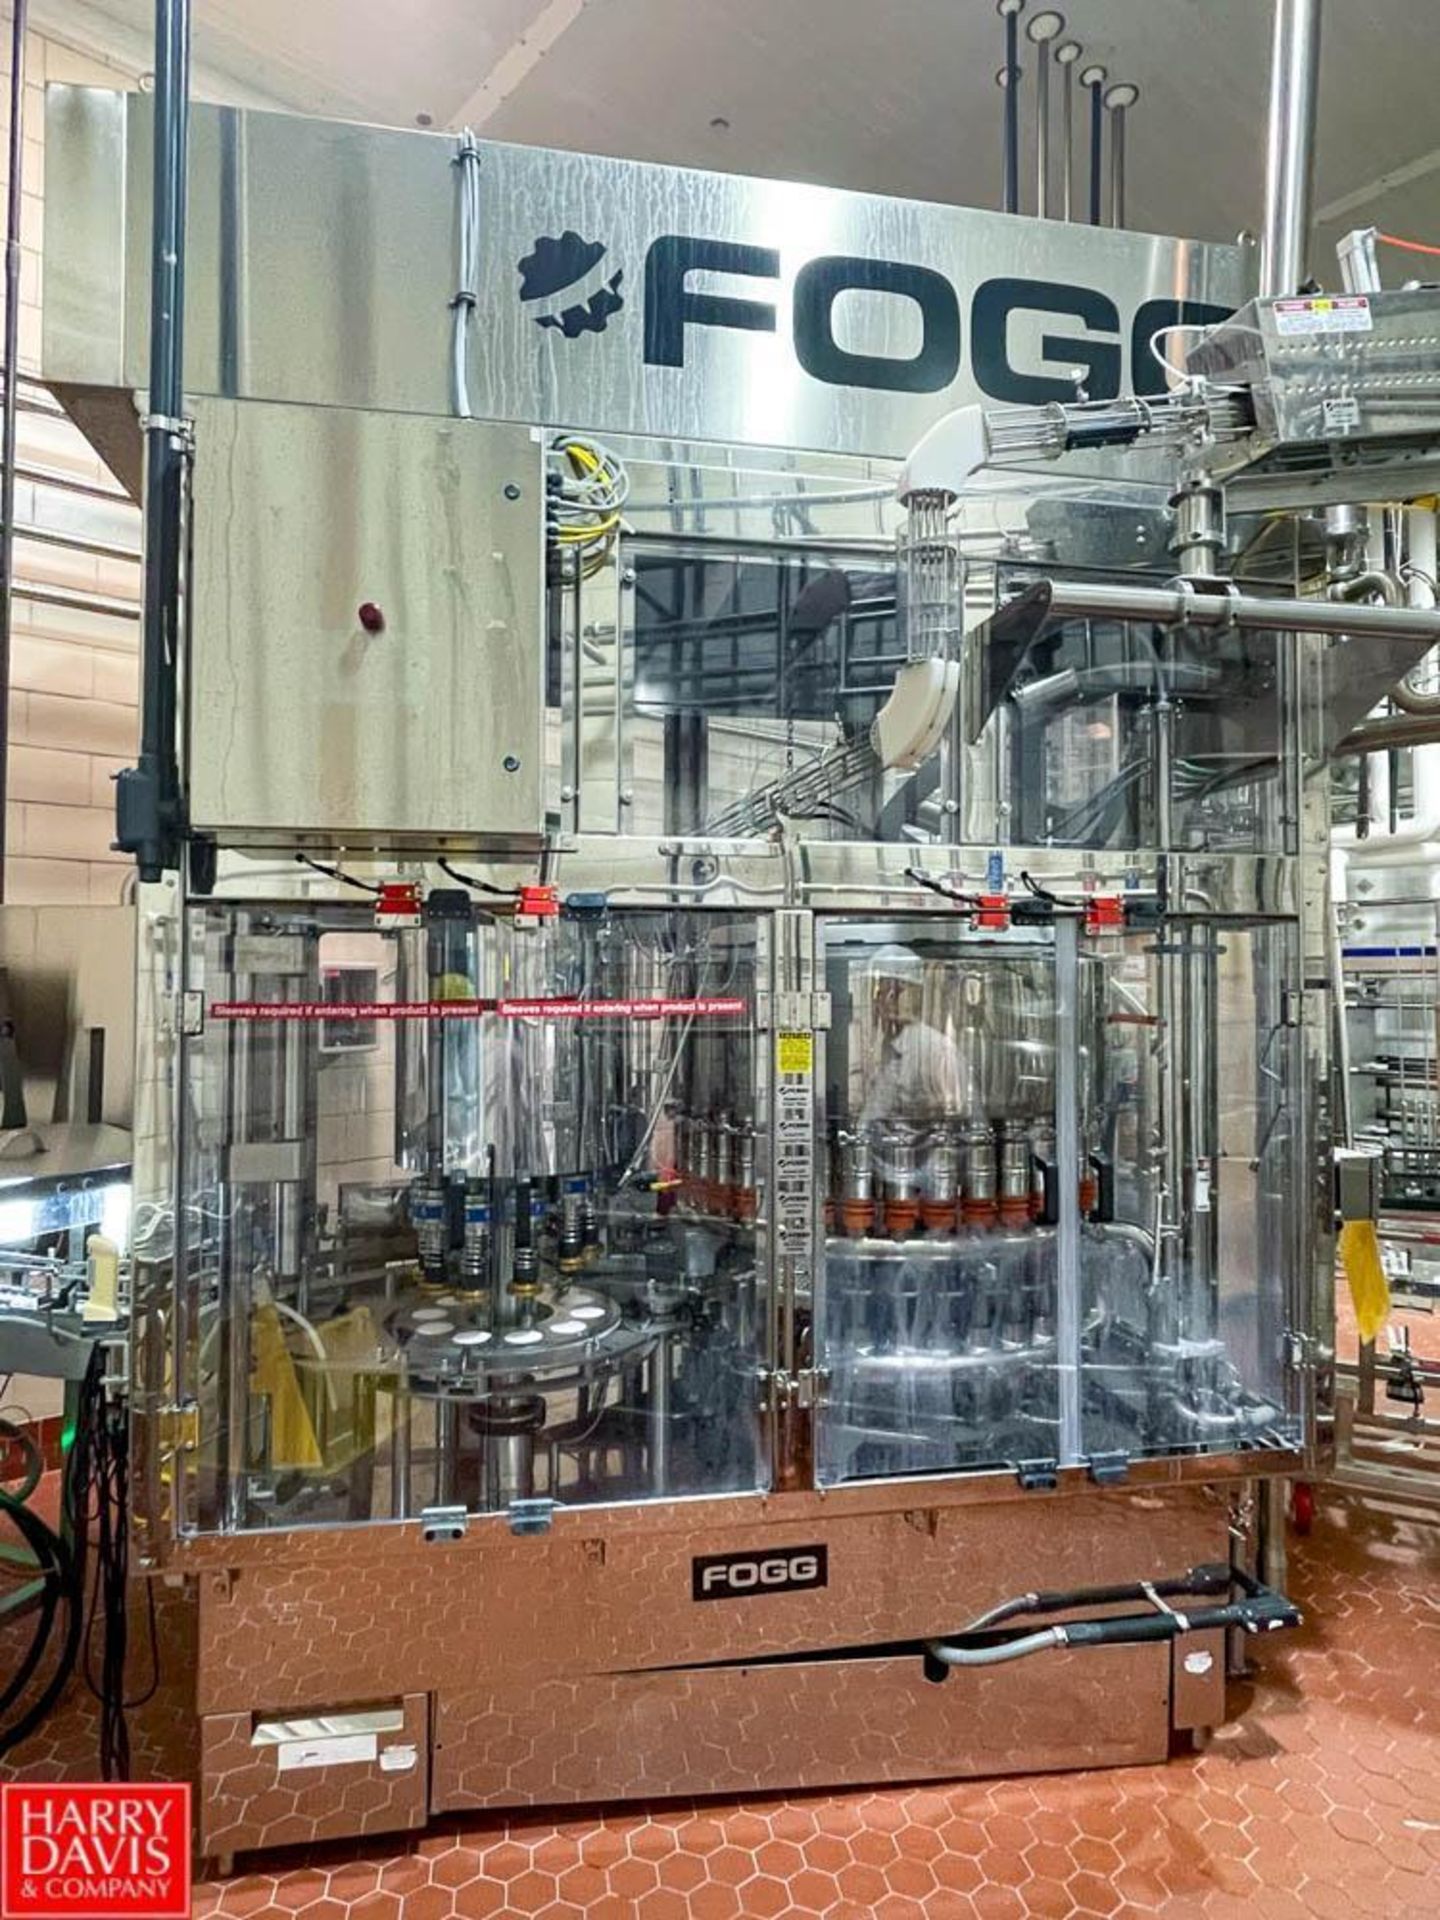 Fogg 36-Valve Filler, S/N: 555-60-1-04-R14 with 10-Head Capper, Cap Feed System, (2) S/S Mixproof